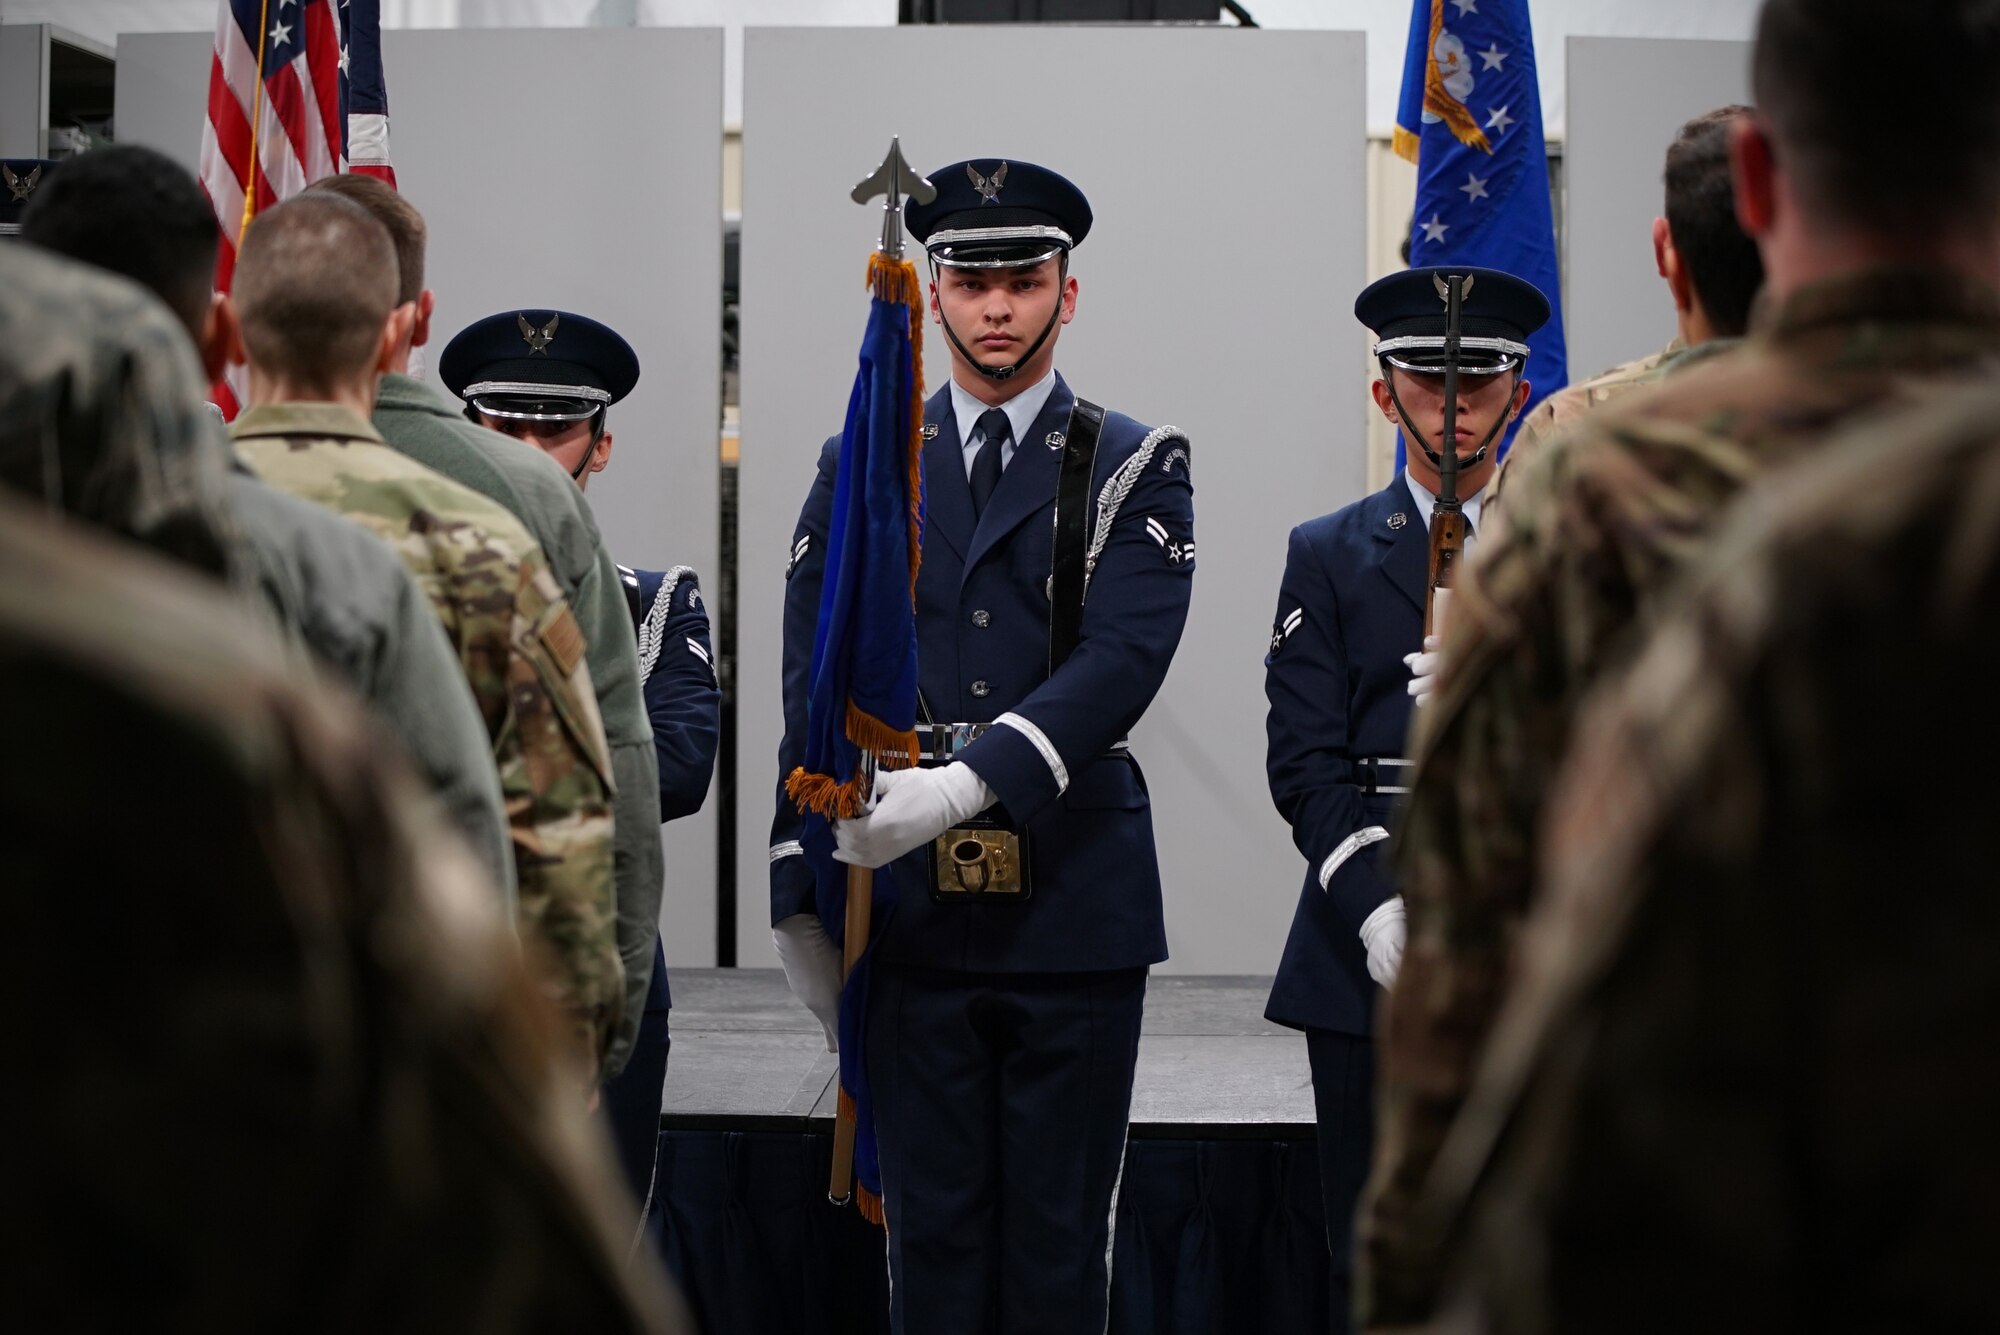 Airman 1st Class Cody Nguyen-Gorter, 319th Reconnaissance Wing honor guardsman, presents the colors during a memorial ceremony Dec. 20, 2019, on Grand Forks Air Force Base, North Dakota. The ceremony was attended by members of the 319th Security Forces Squadron in memory of one of their military working dogs, “Dex.” (U.S. Air Force photo by Senior Airman Elora J. Martinez)